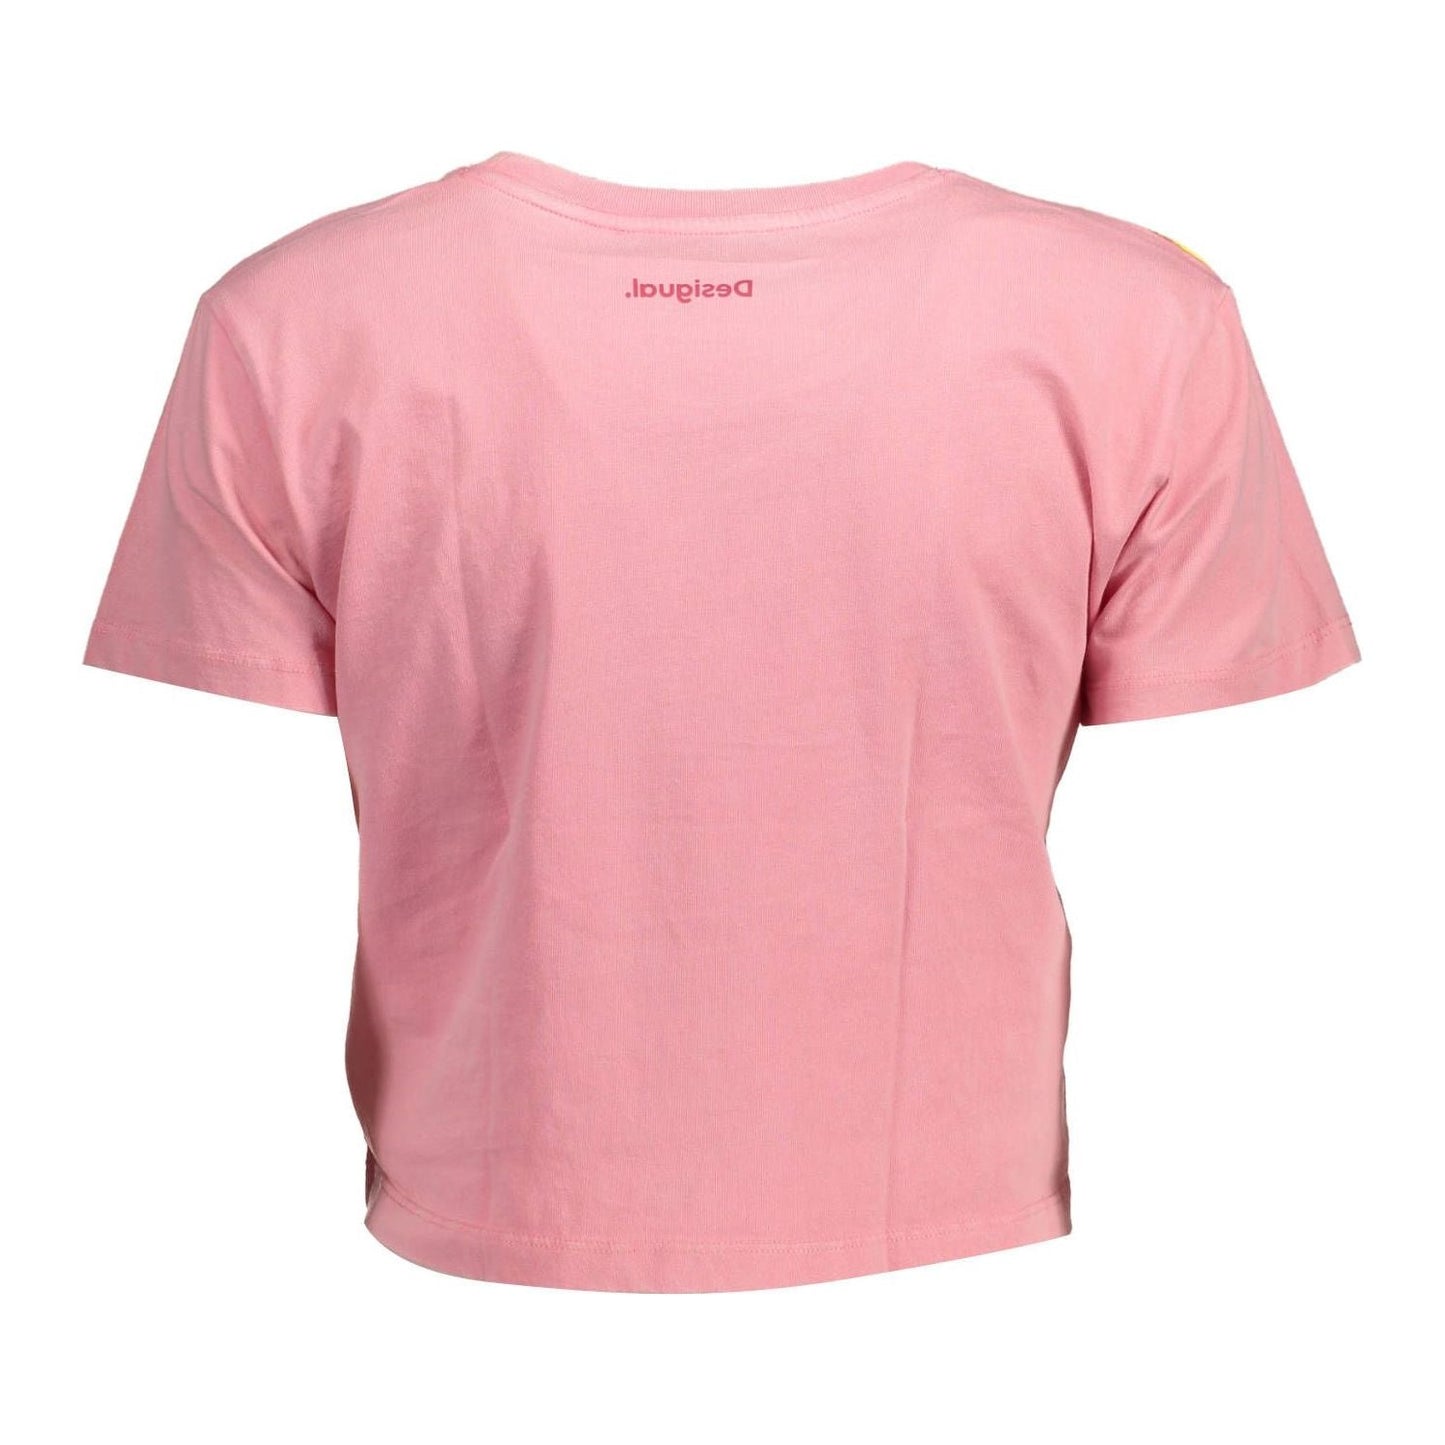 Desigual Chic Pink Embellished Cotton Tee chic-pink-embellished-cotton-tee